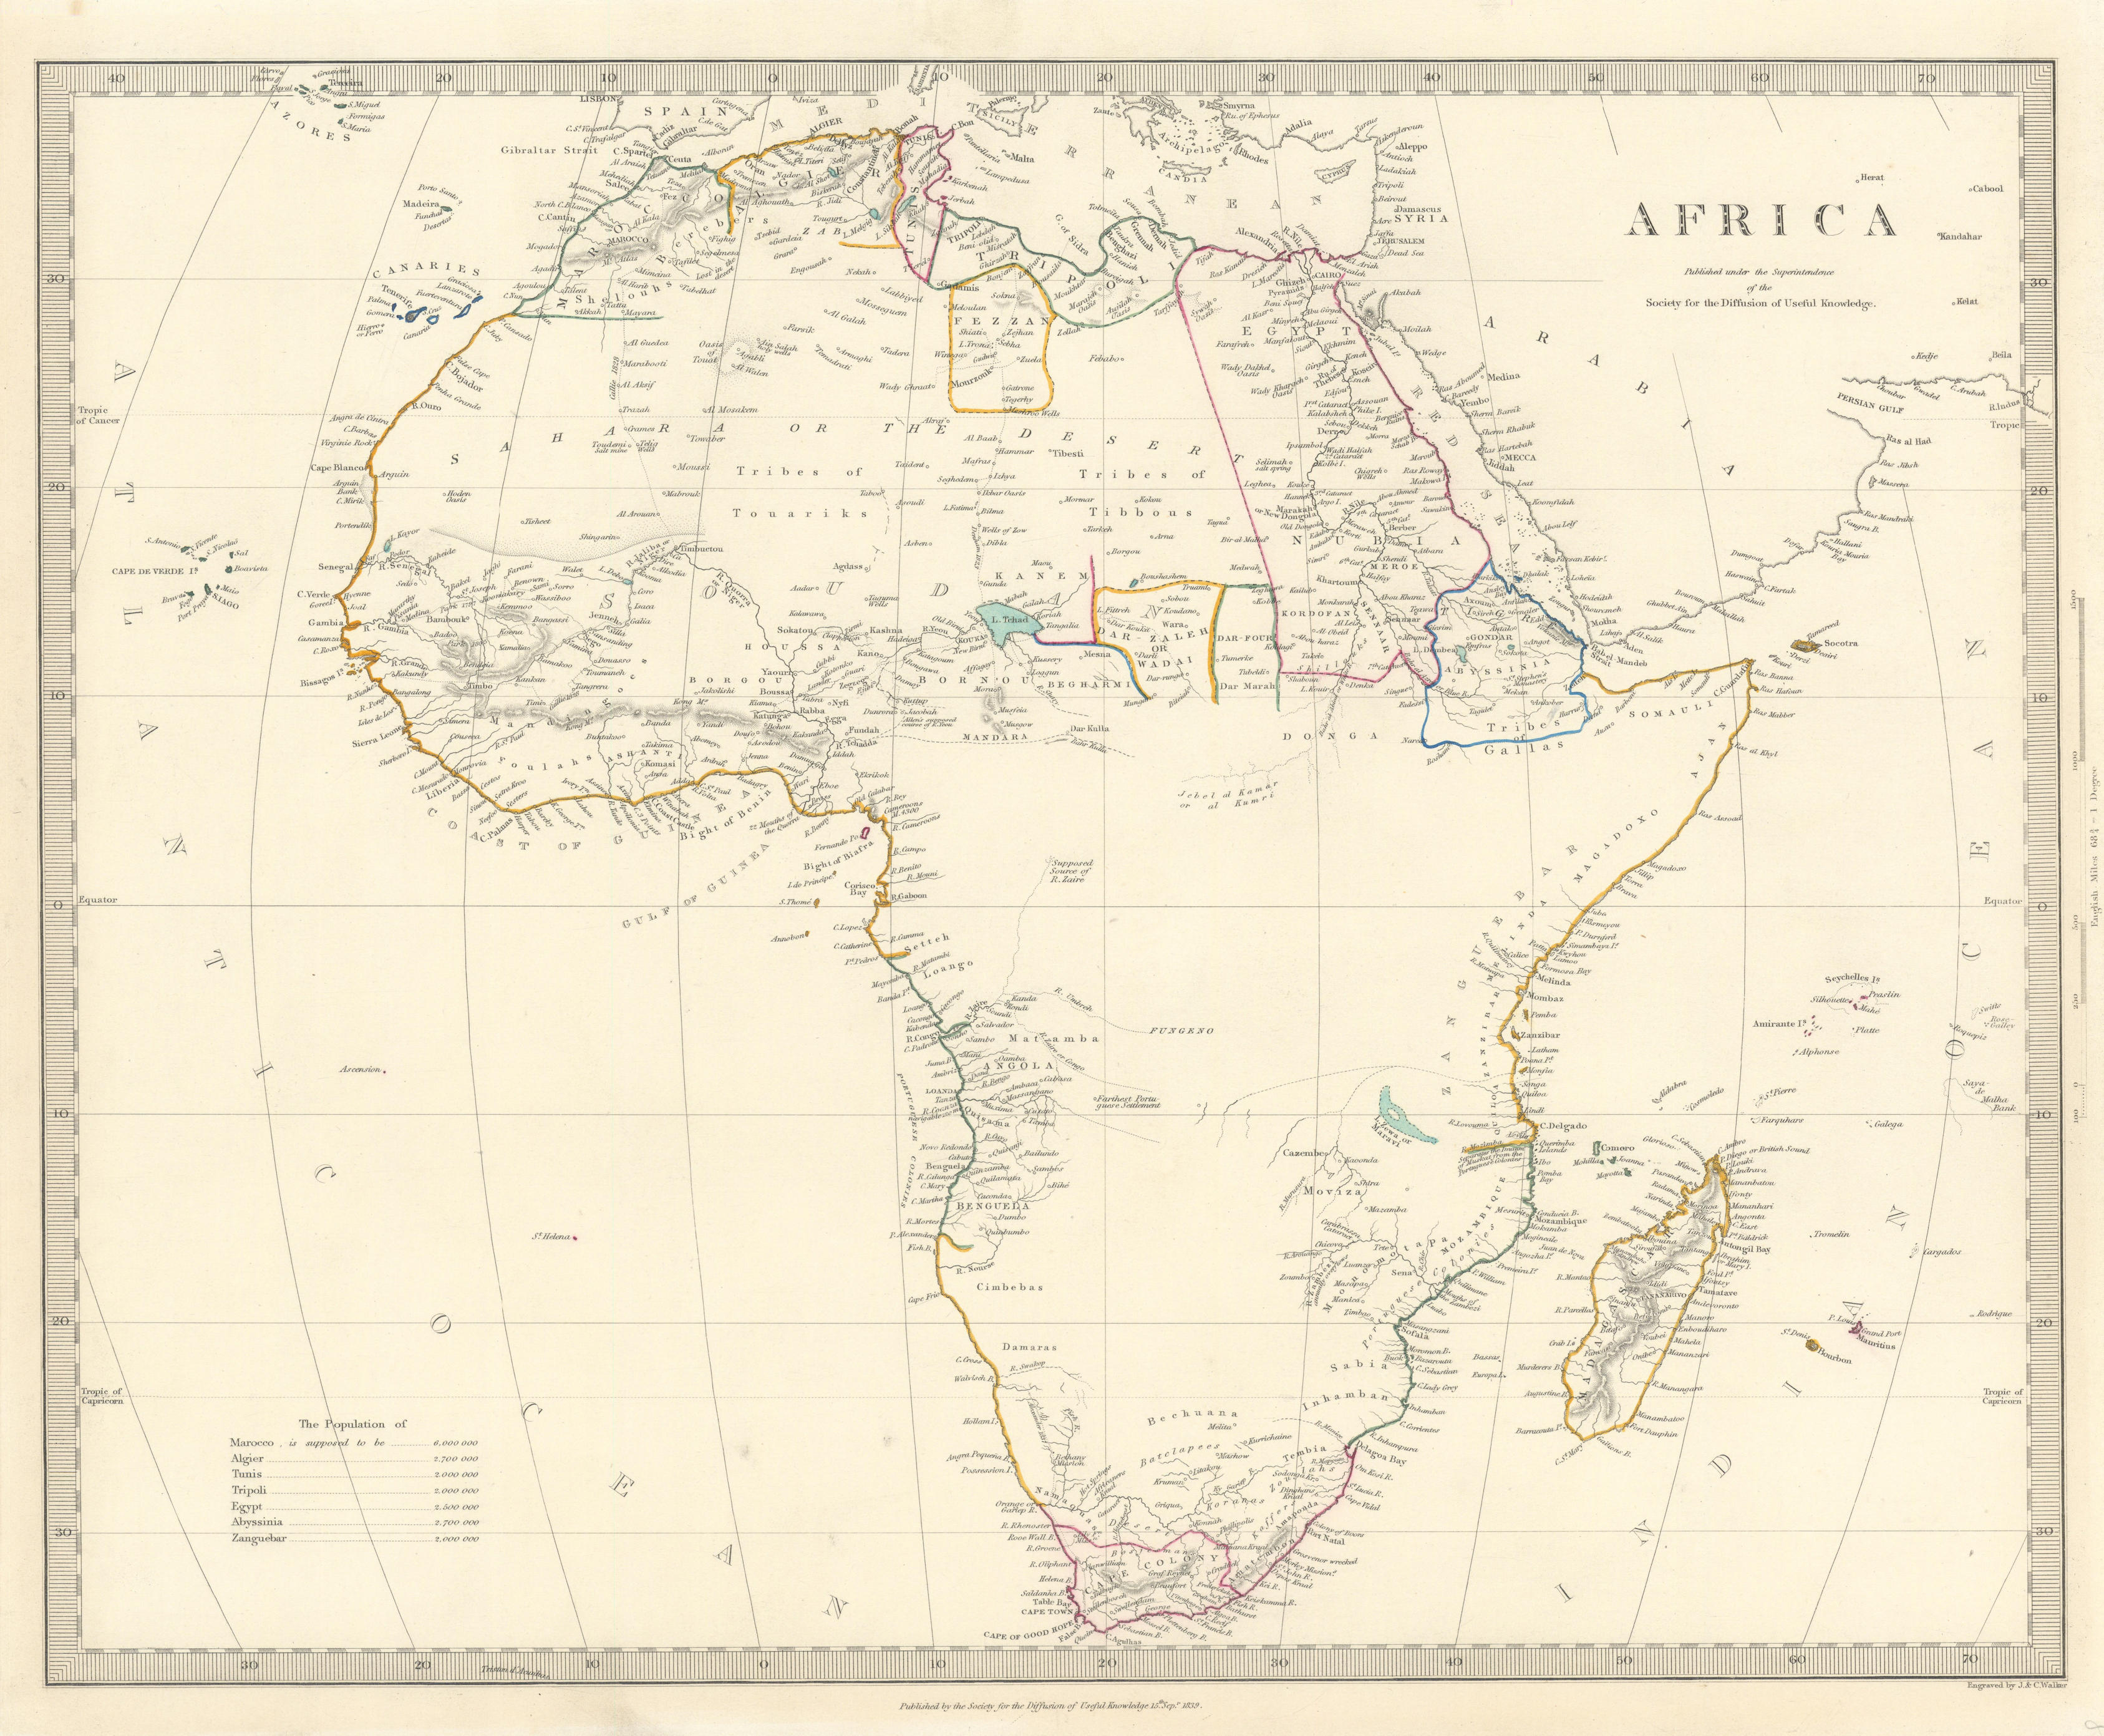 AFRICA map pre-dating much exploration. Mountains of Kong.Population.SDUK 1844